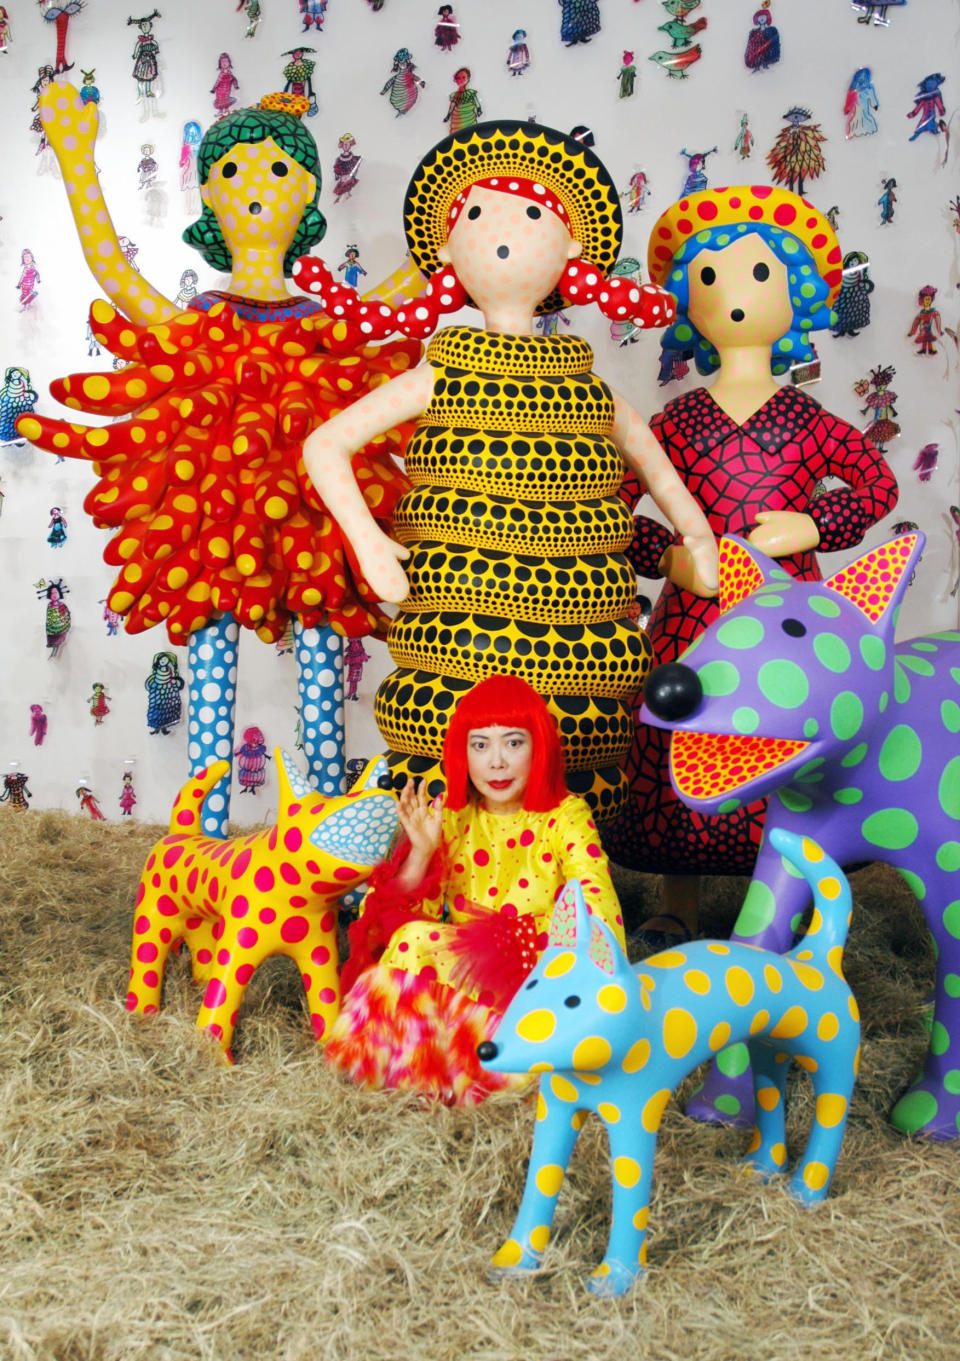 In this 2004 photo released by Yayoi Kusama Studio Inc., Japanese artist Yayoi Kusama sits amid her installation titled "Hi, Konnichiwa (hello)" at her solo exhibition "KUSAMA TRIX" at Mori Art Museum in Tokyo. Kusama's signature splash of dots has now arrived in the realm of fashion in a new collection from French luxury brand Louis Vuitton - bags, sunglasses, shoes and coats. The latest Kusama collection is showcased at its boutiques around the world, including New York, Paris, Tokyo and Singapore, sometimes with replica dolls of Kusama. (AP Photo/Yayoi Kusama Studio Inc.) NO SALES, EDITORIAL USE ONLY, CREDIT MANDATORY